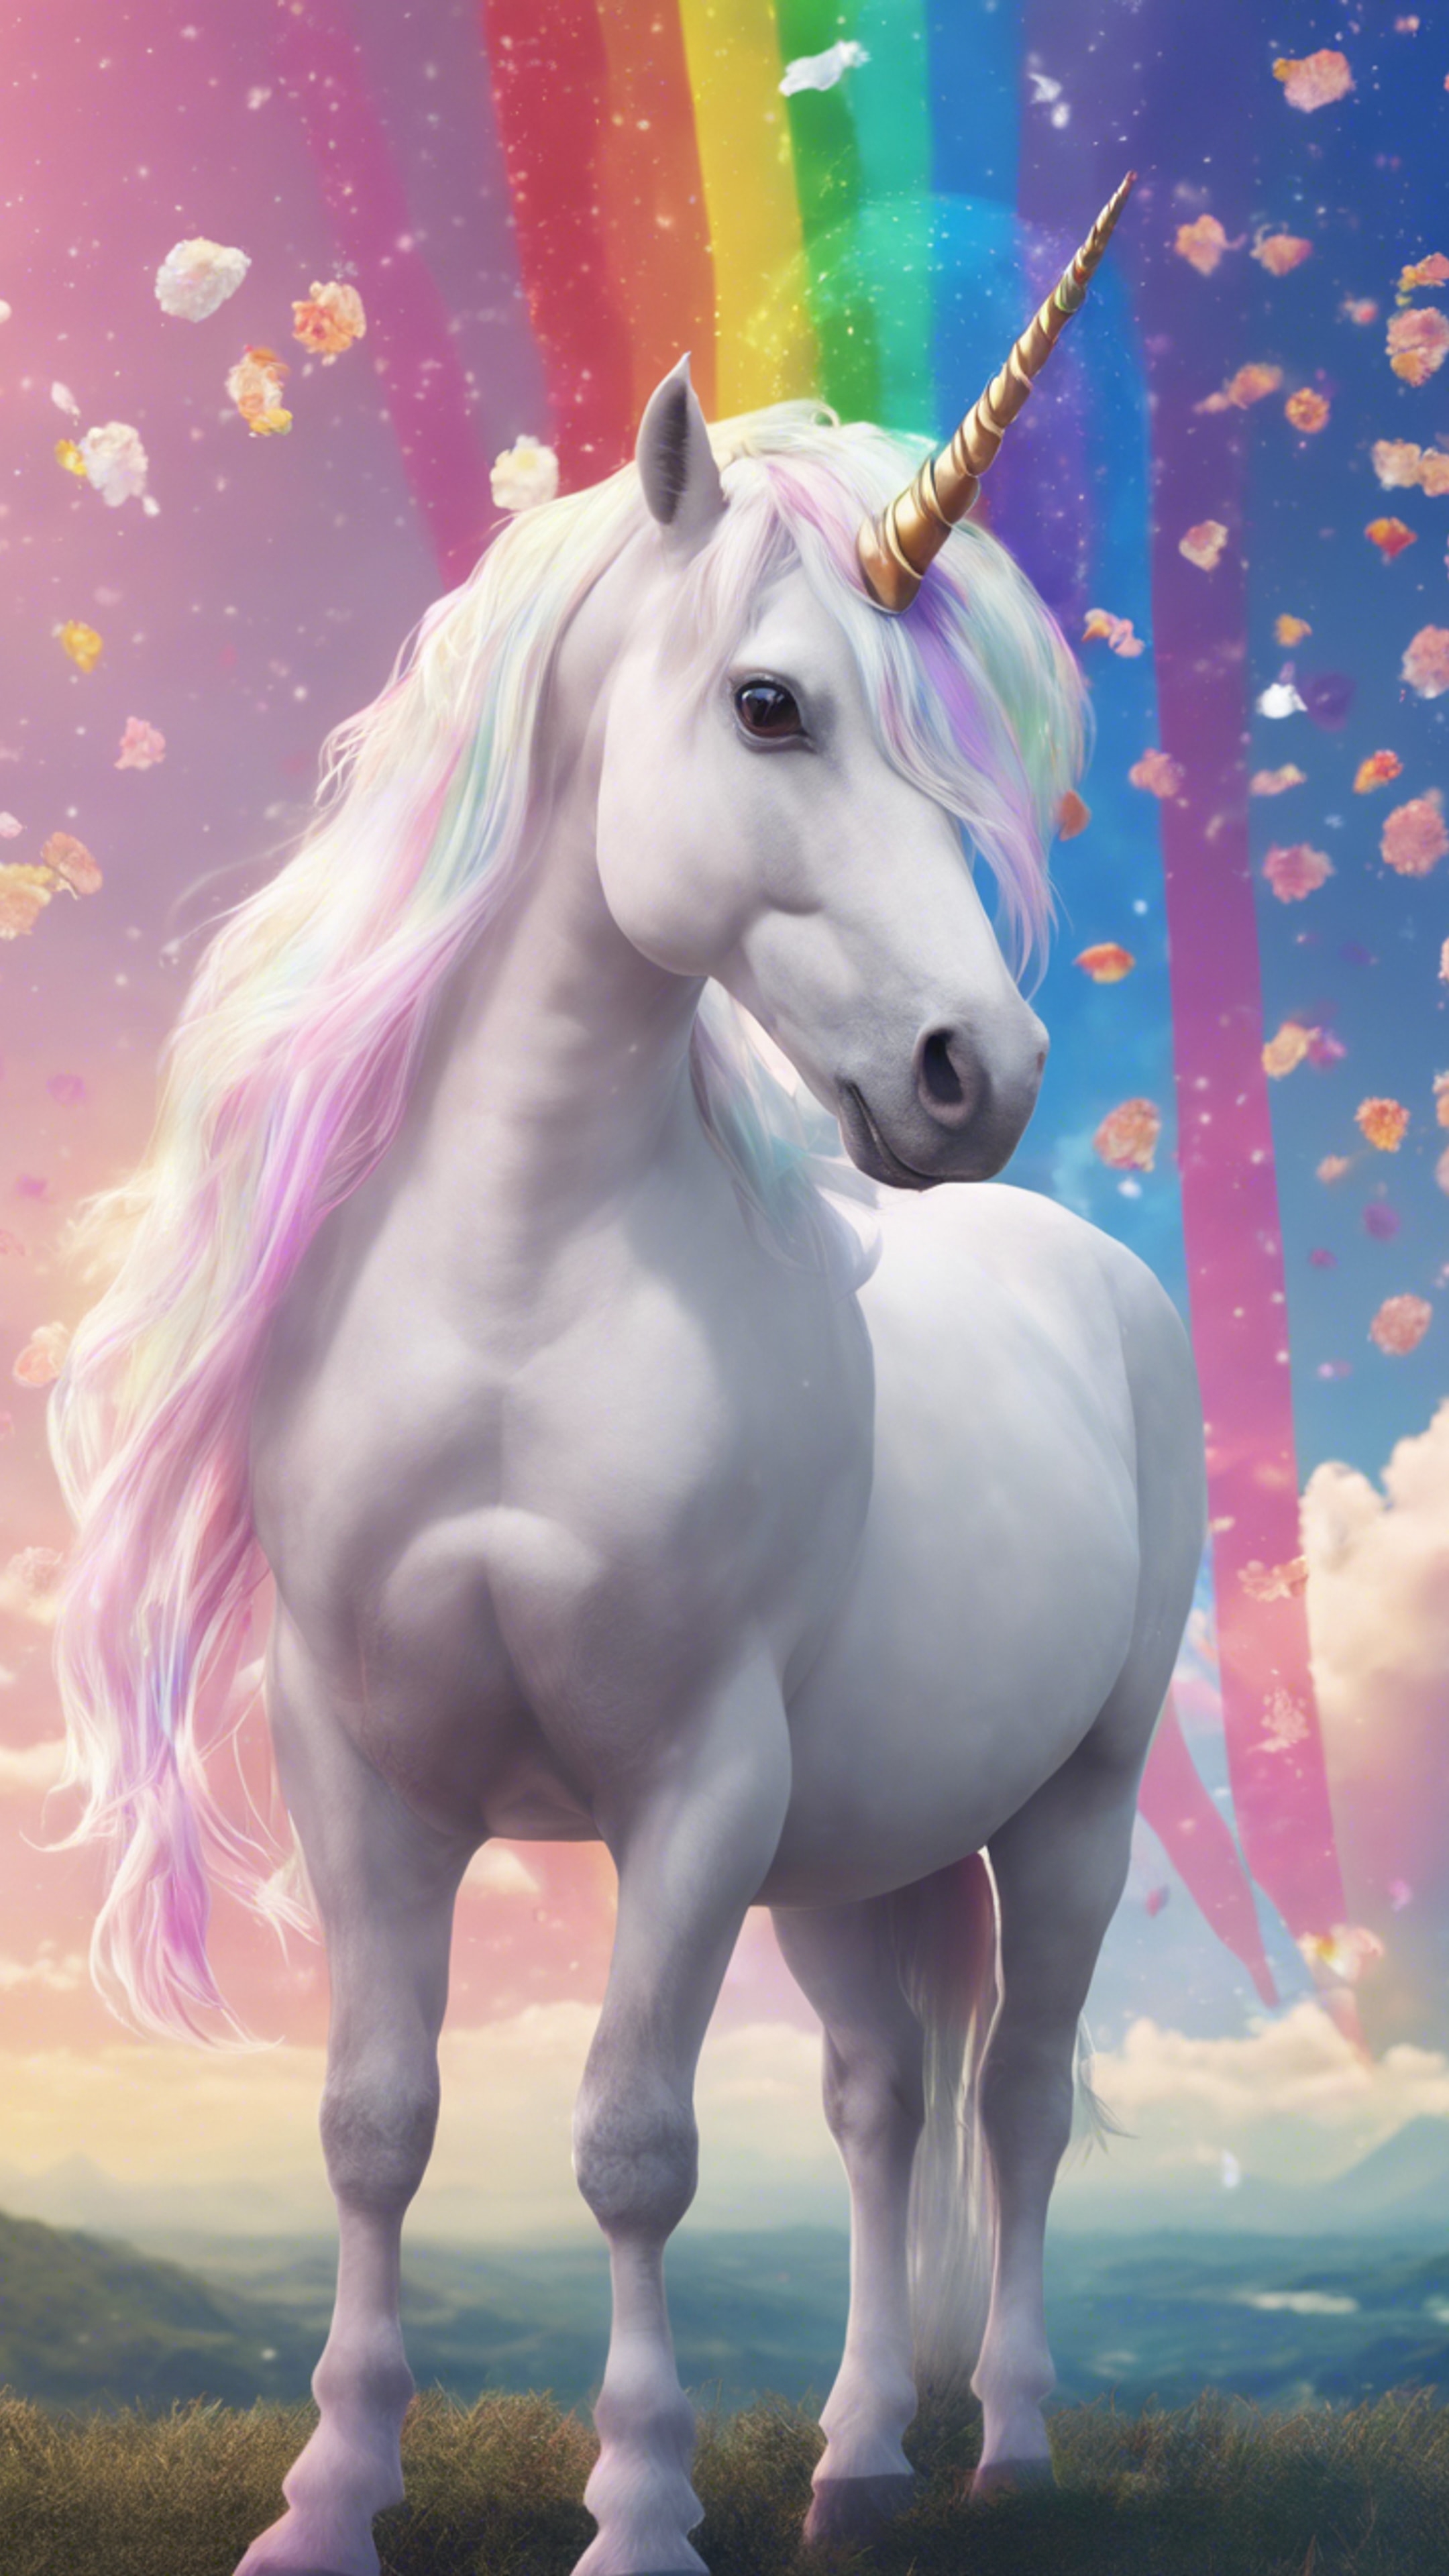 A white unicorn with rainbow-colored mane in a kawaii styled anime background. Tapet[3fcd035c52a54abd9a77]